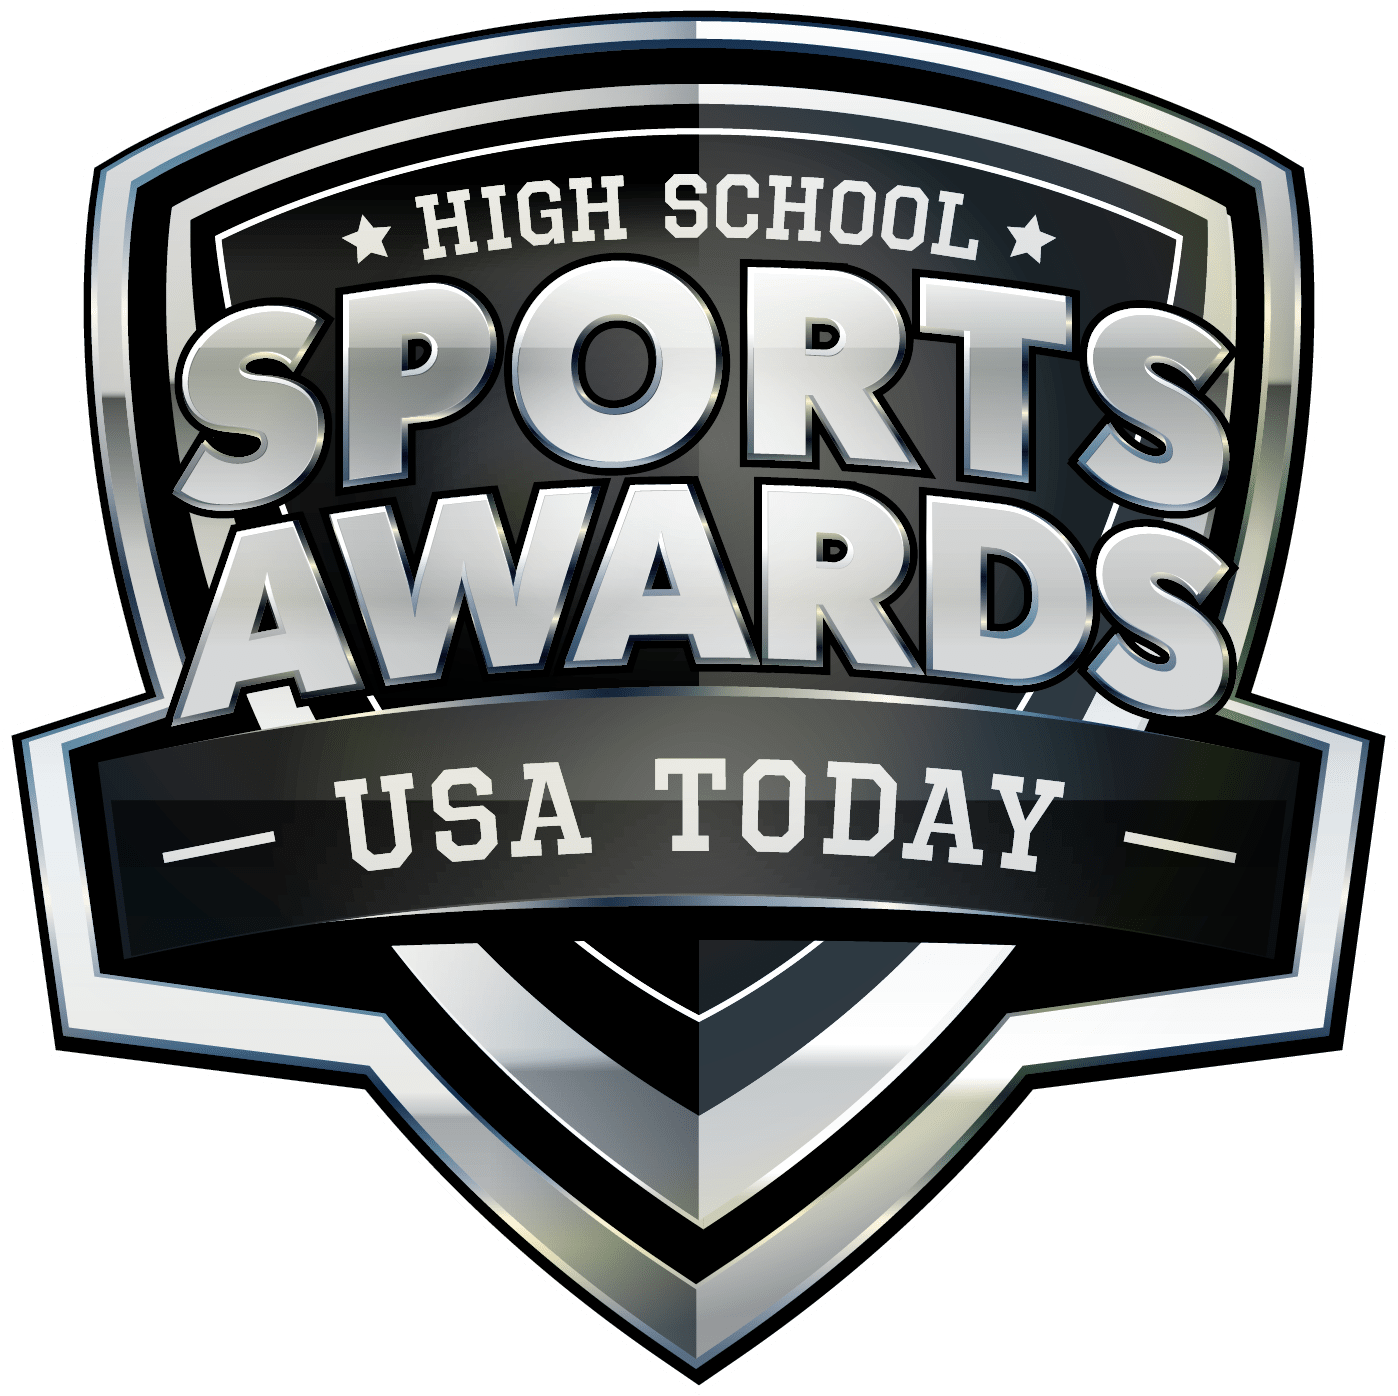 Logistics Plus on the 2021 USA TODAY National High School Sports Awards Show